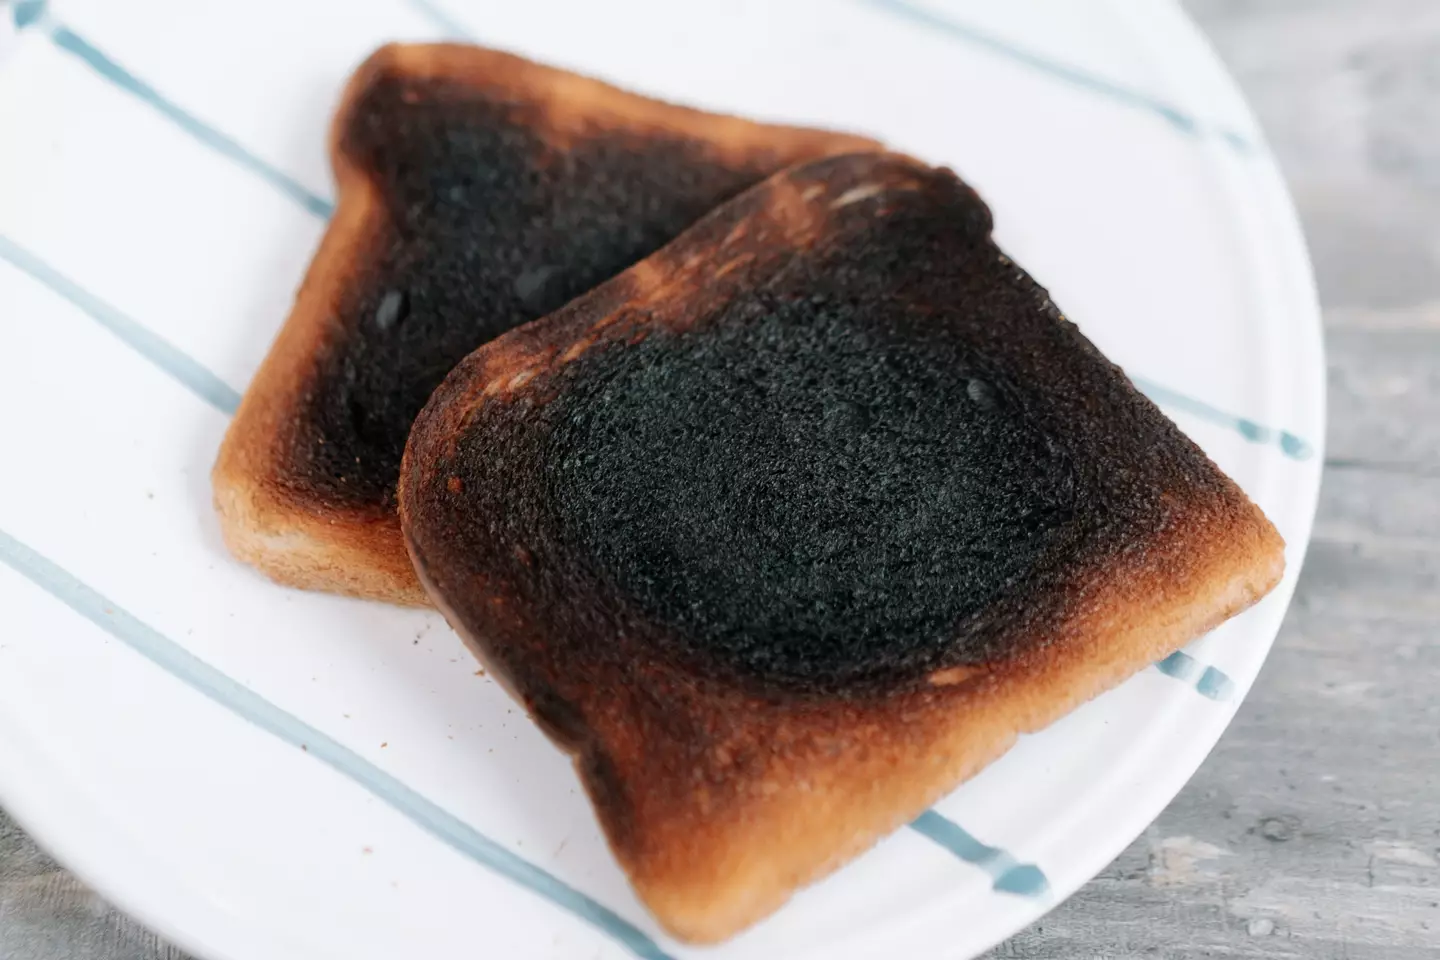 Burned toast may not be the best idea.